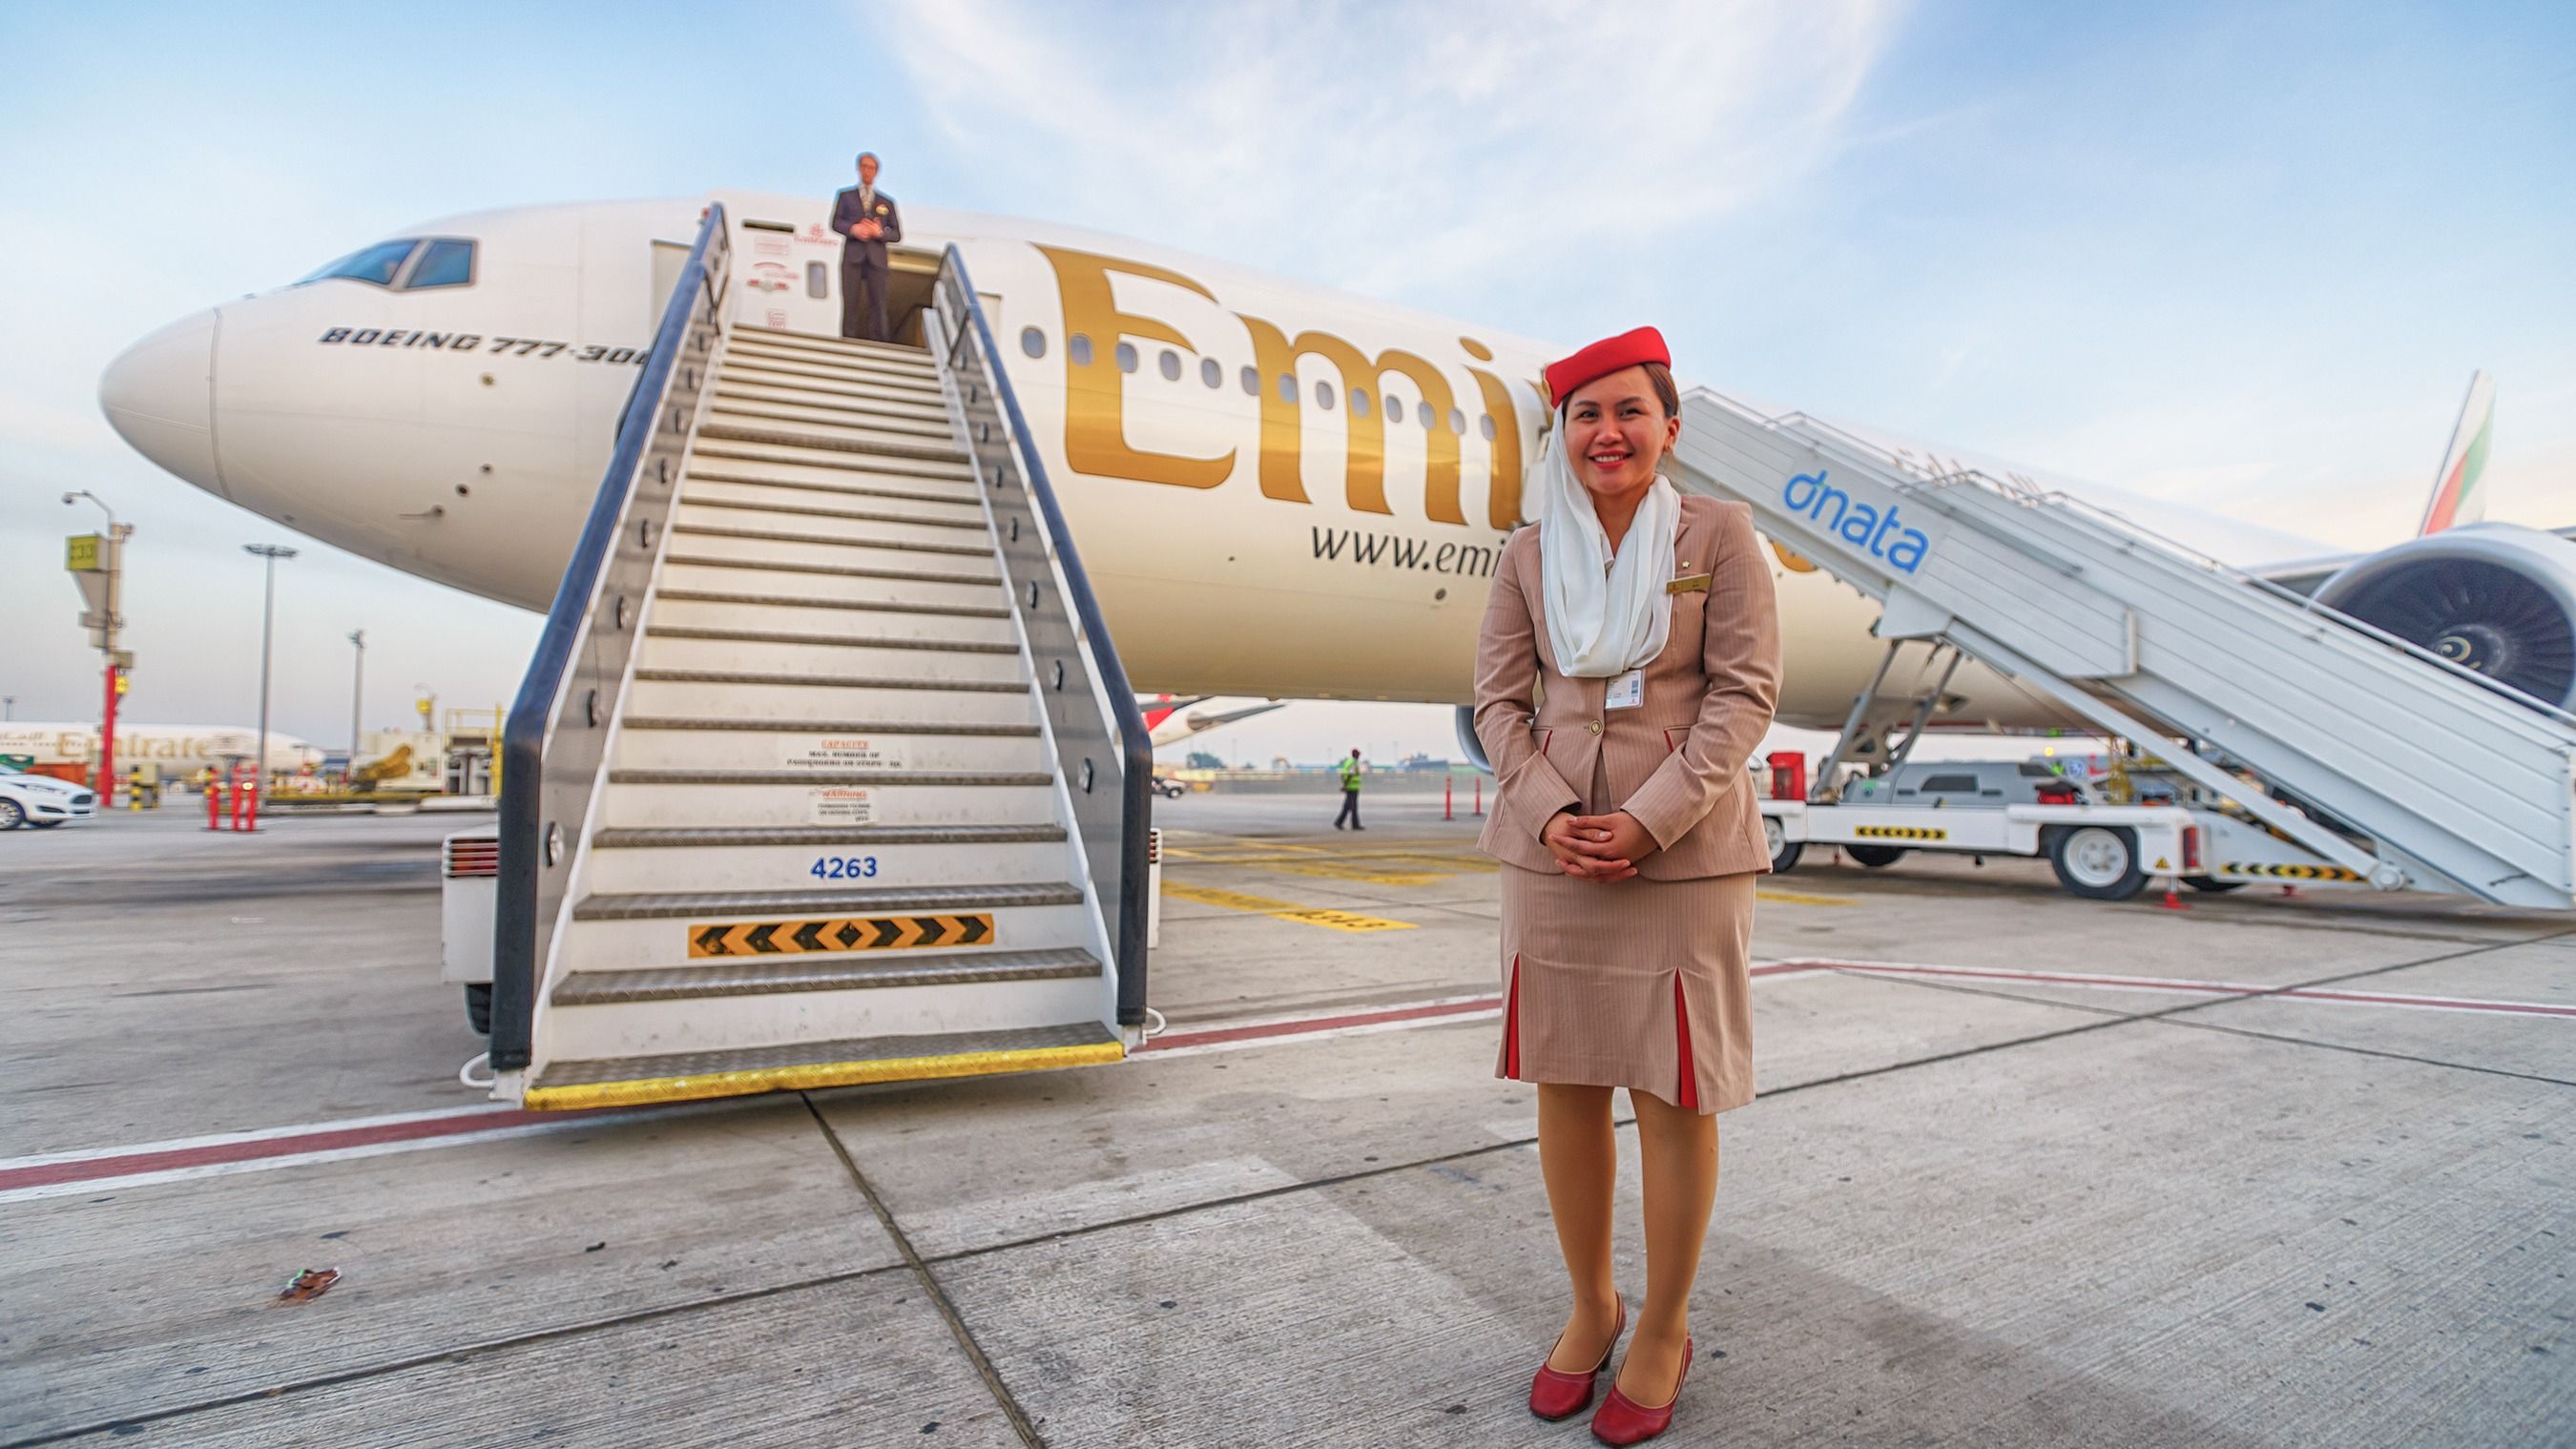 A flight attendant stands nearby an Emirates Boeing 777.